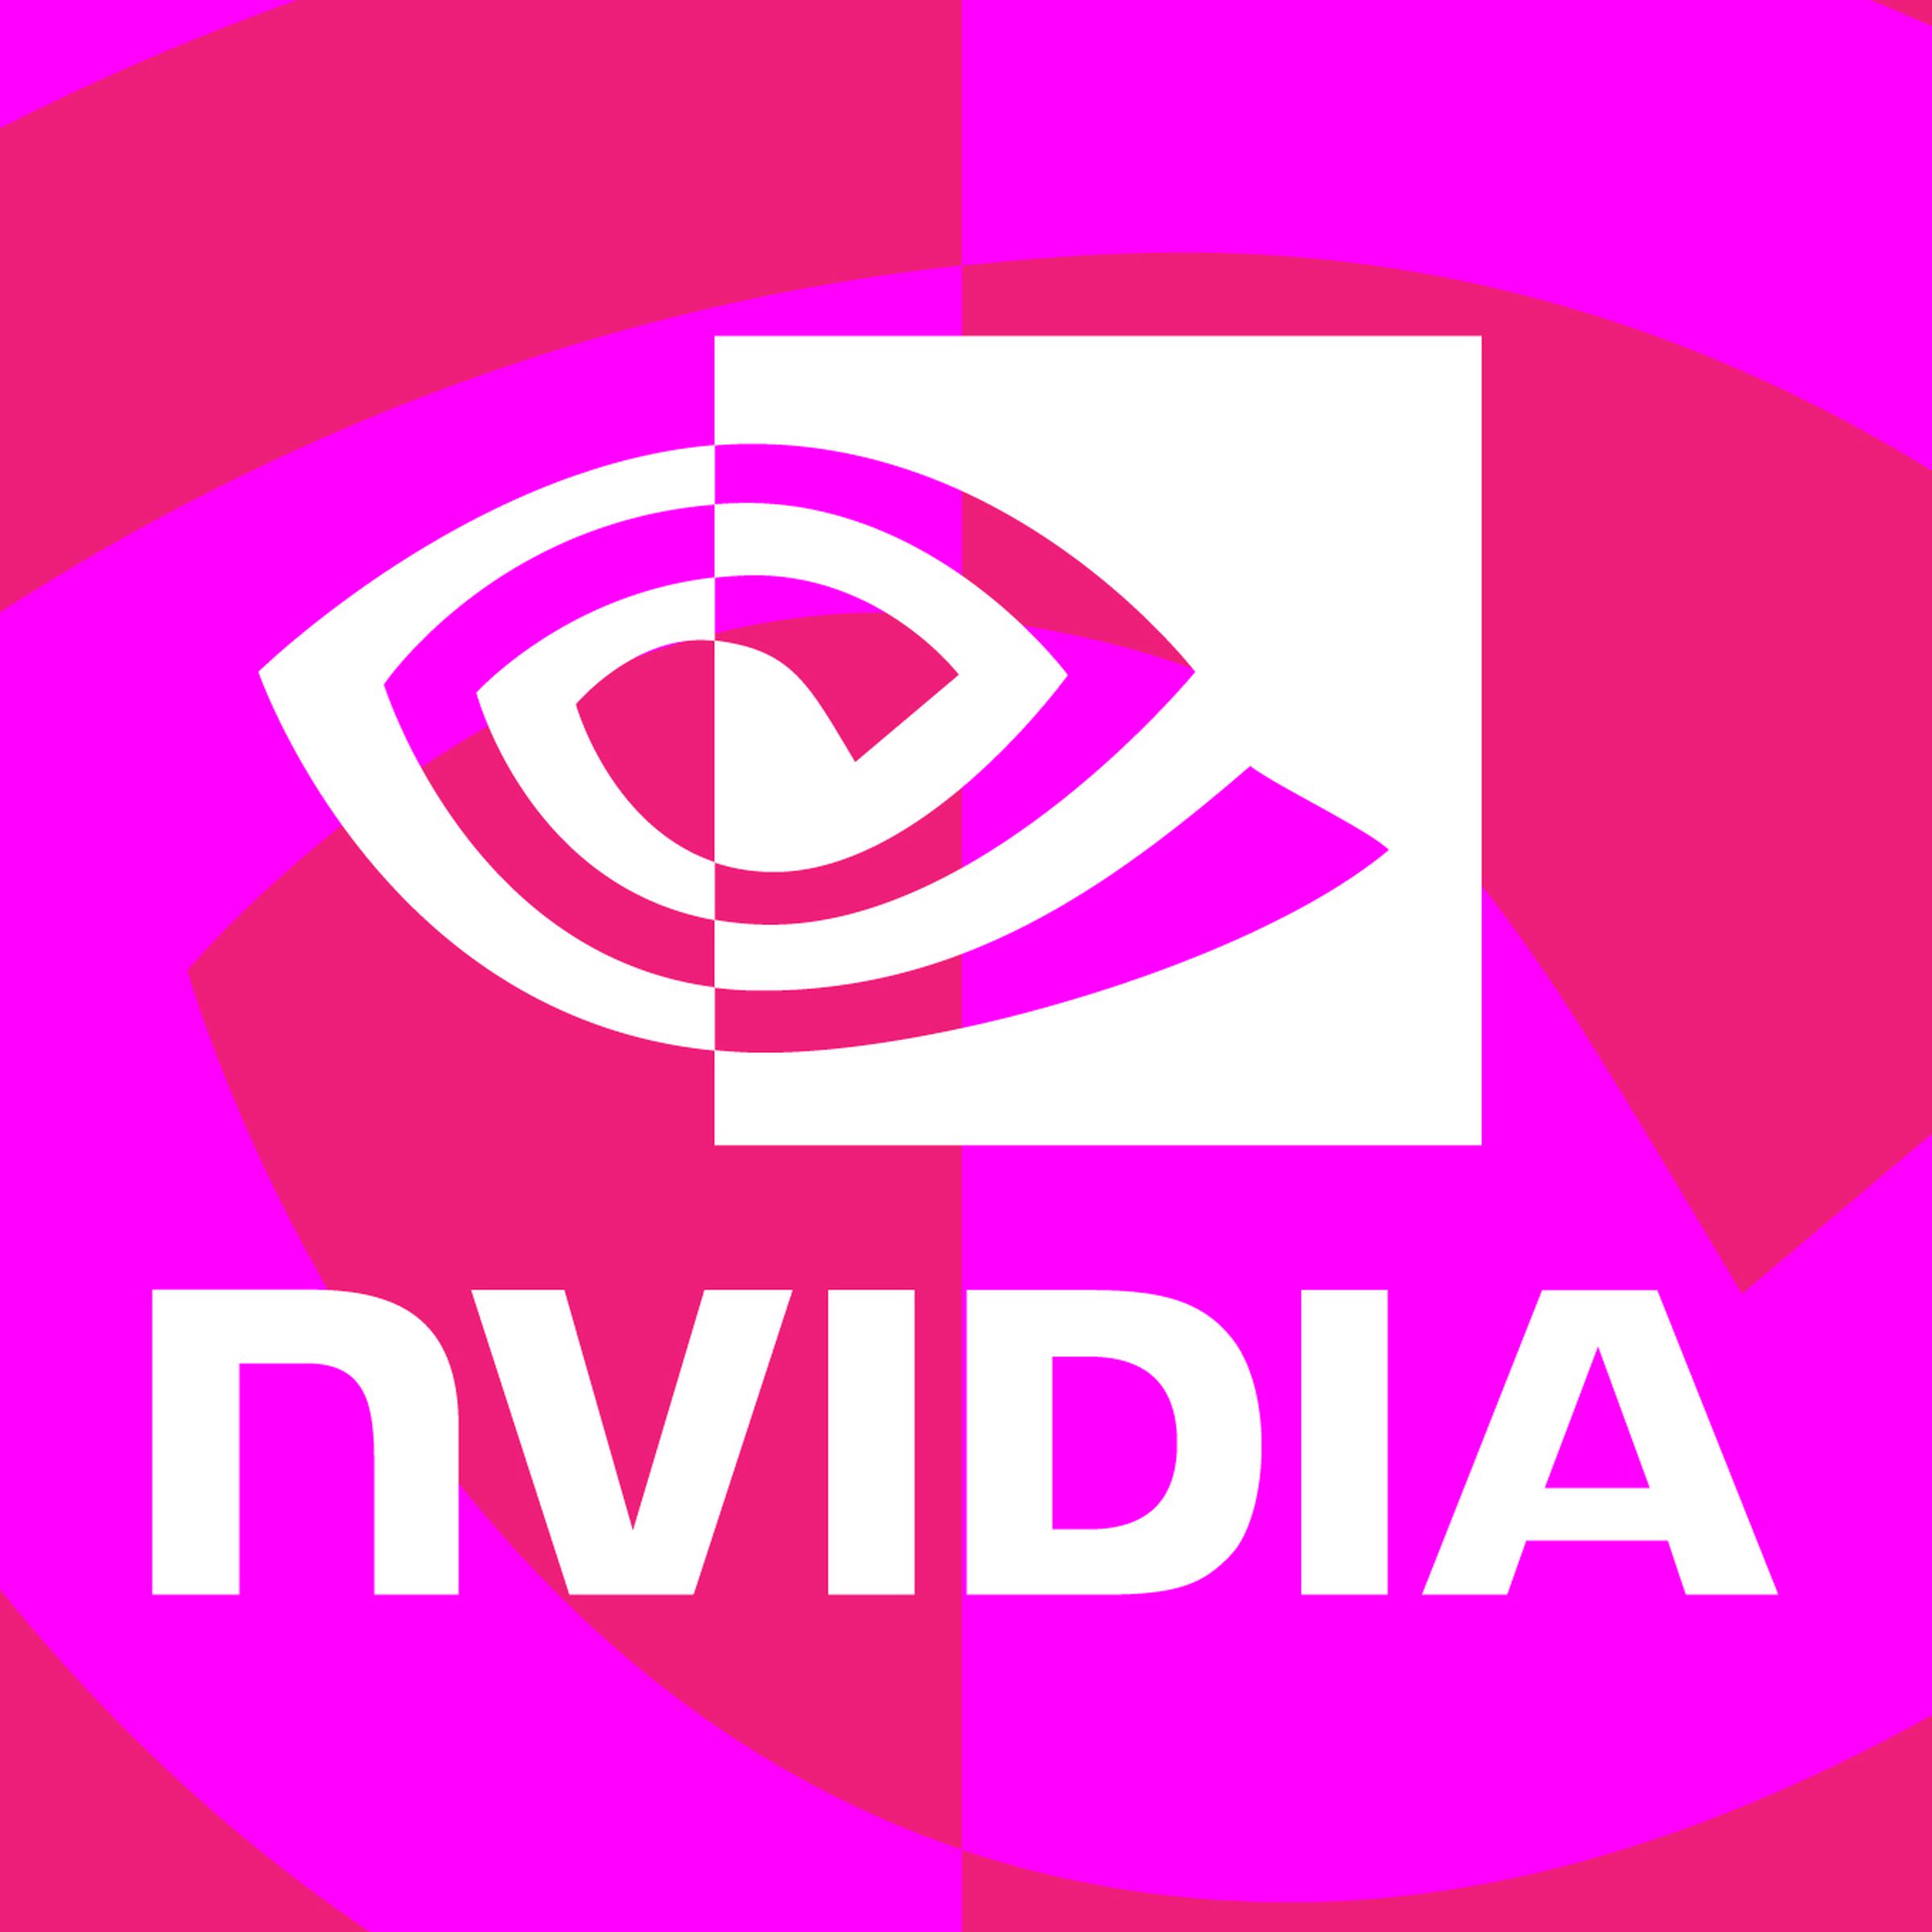 Vector collage of the Ndivia logo.